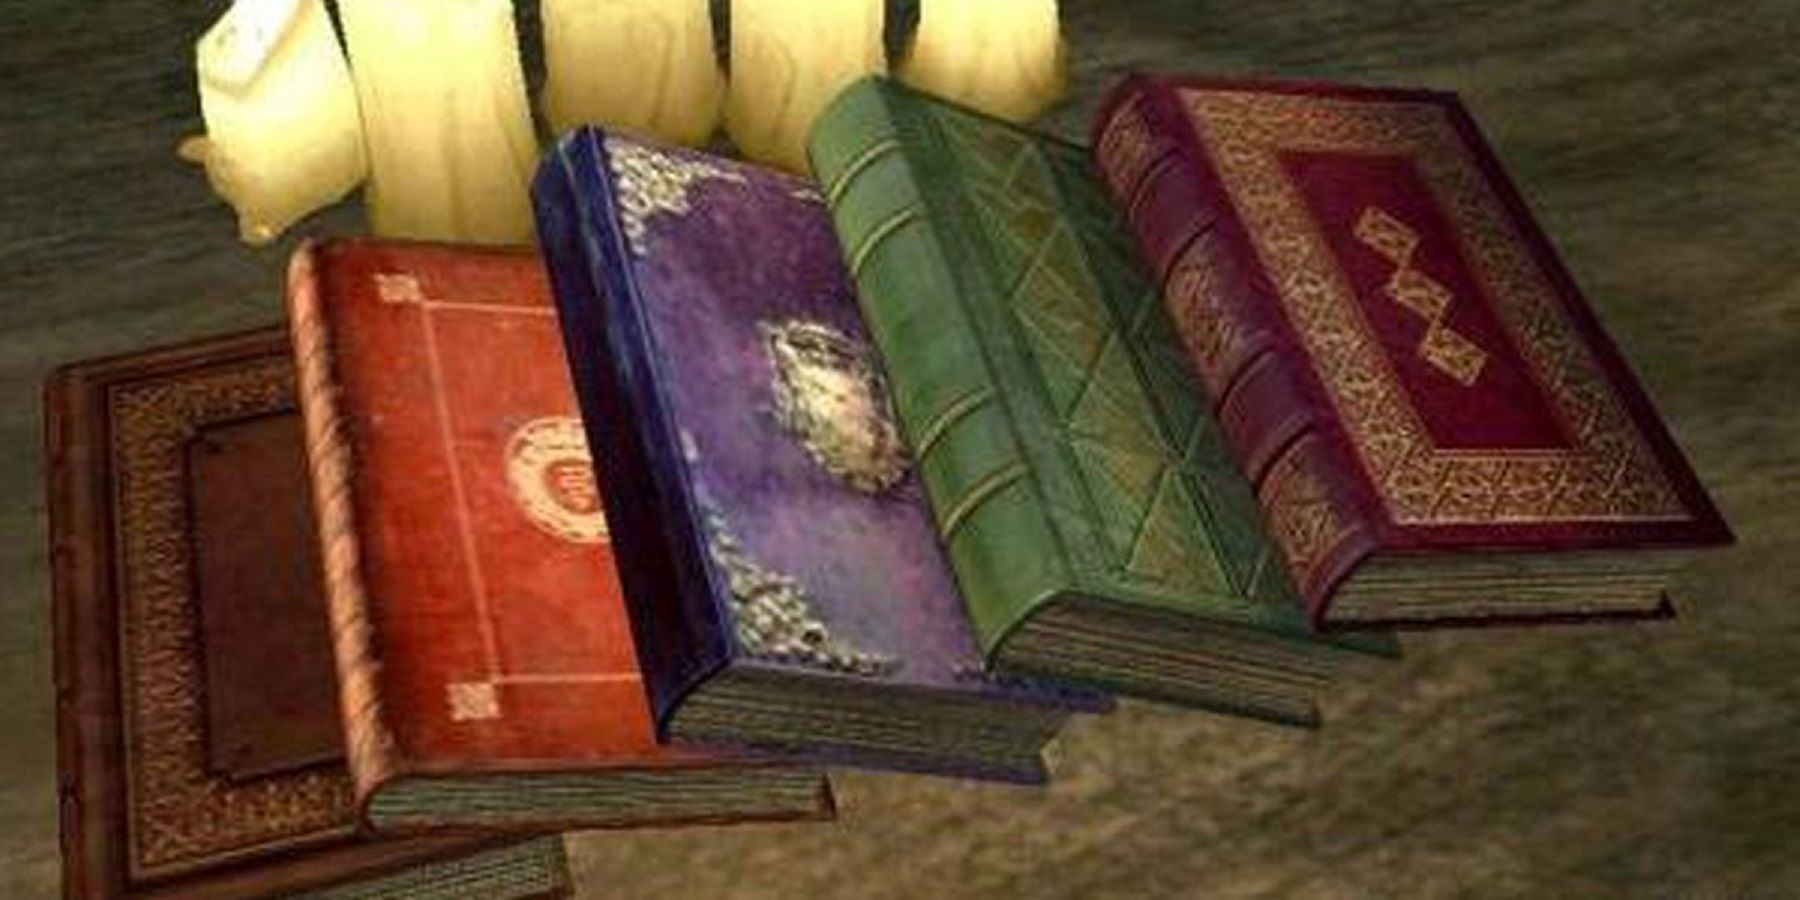 dedicated-skyrim-player-collects-every-book-in-the-game